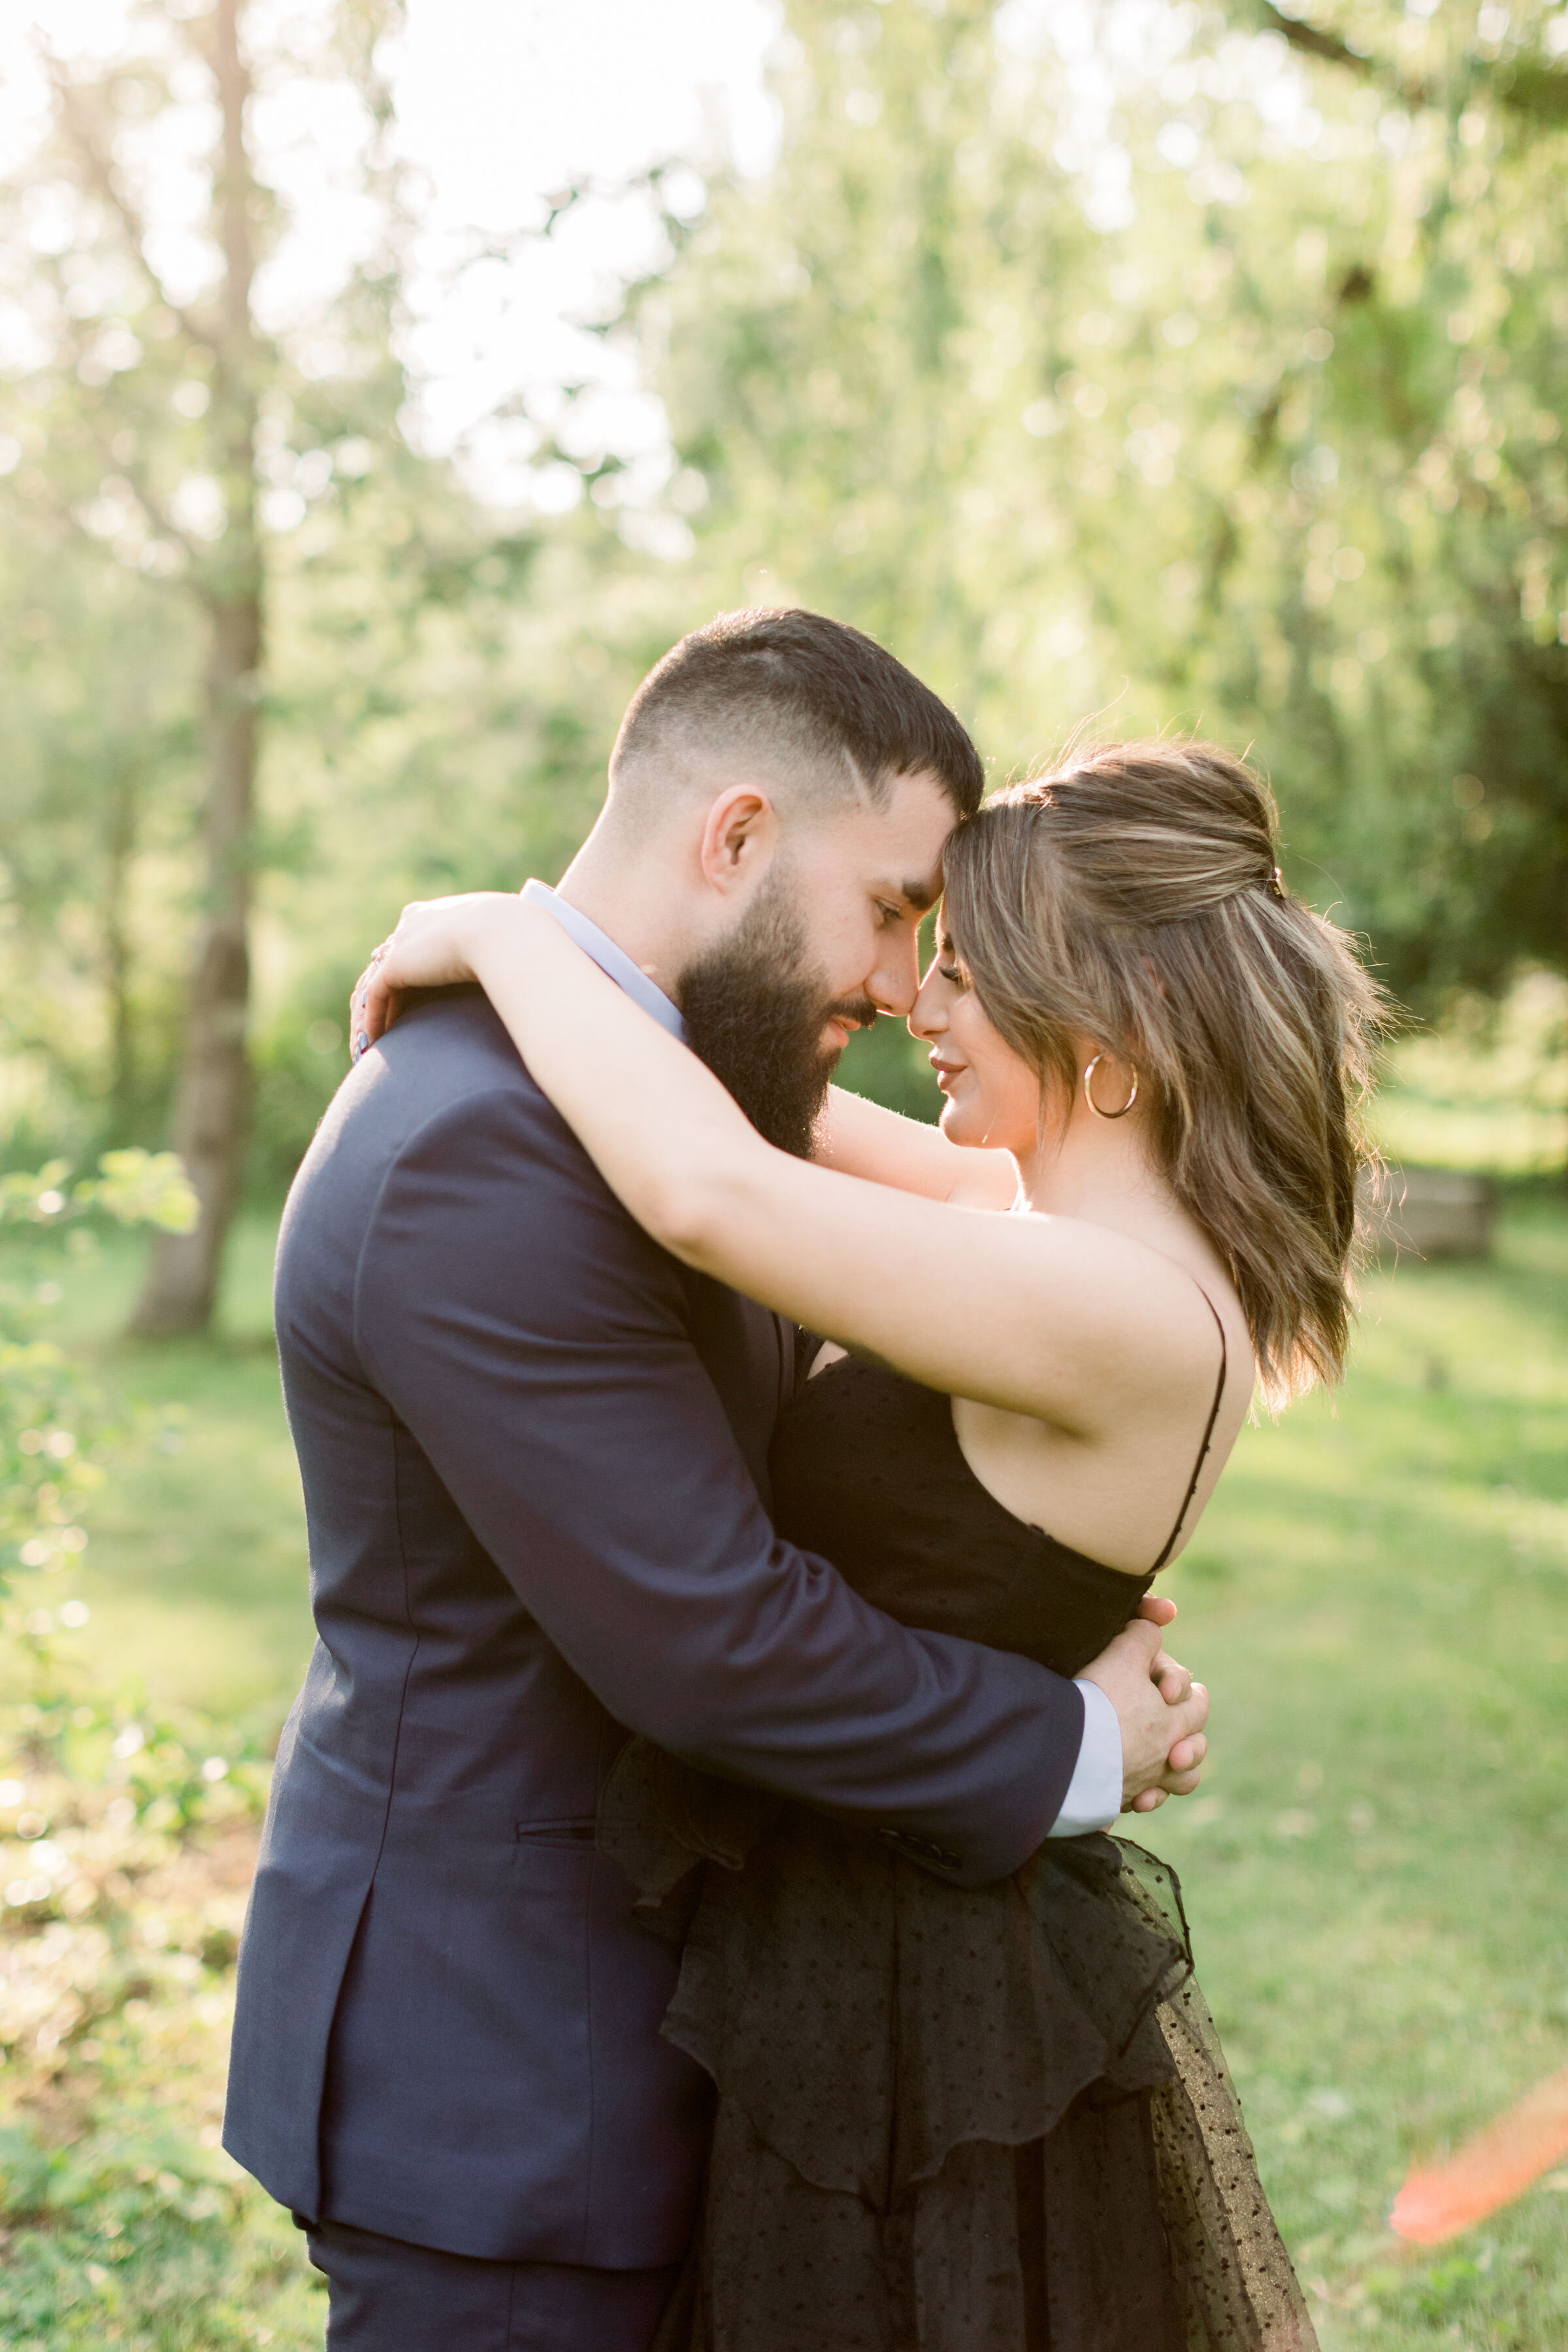  Holding one another close and pressing foreheads together, Ottawa, Ontario photographer, Chelsea Mason Photography captures this couple for their engagement session. couple pressing foreheads together formal engagement outfits Ottawa photographer #C